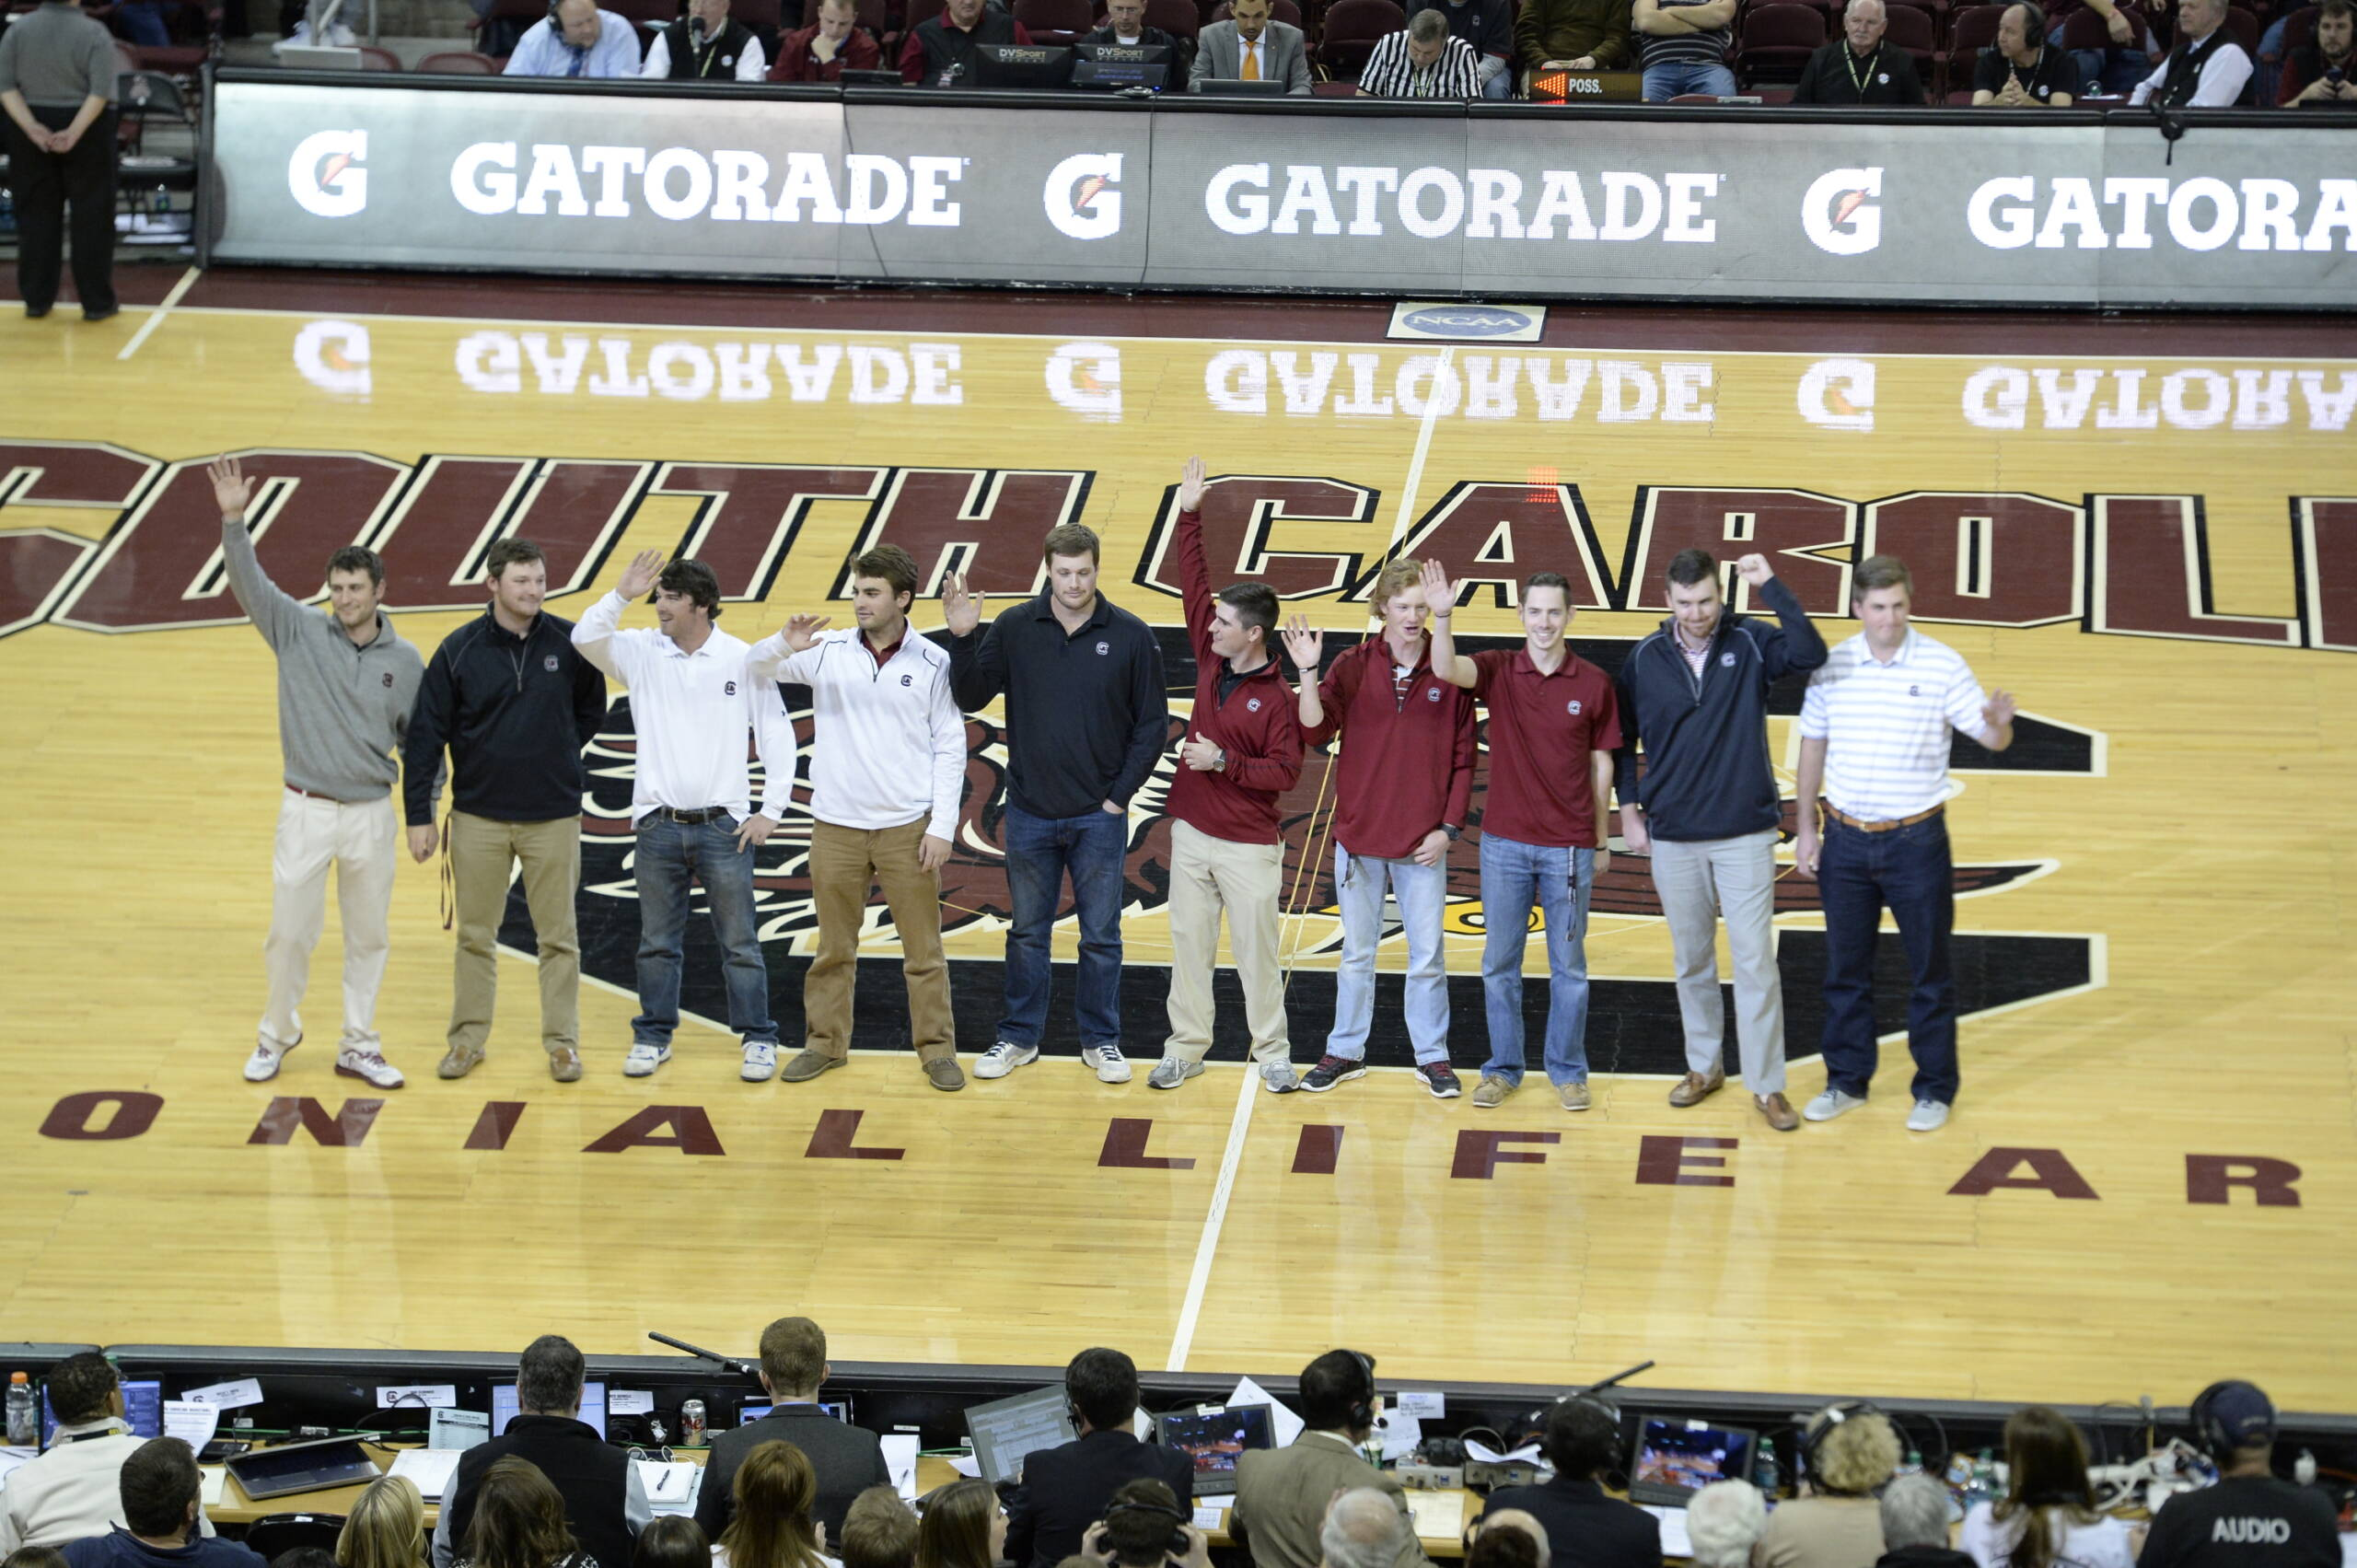 Gamecocks Introduced at Men's Basketball Game - 1/20/15